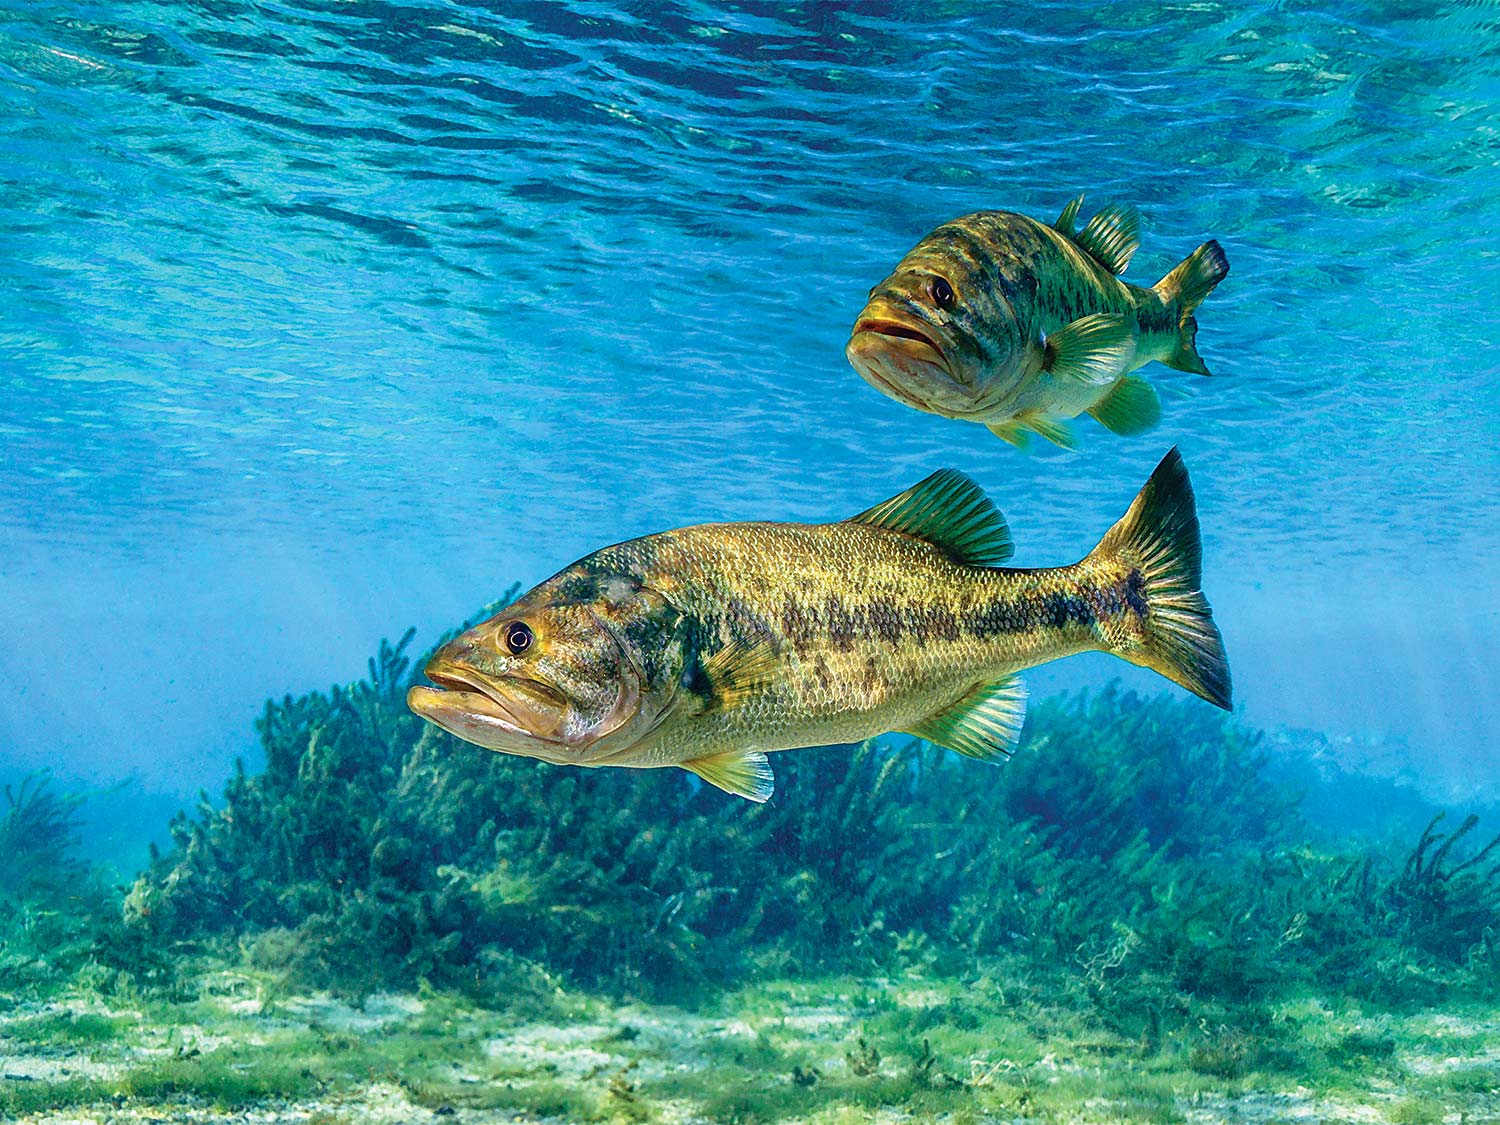 Two largemouth bass in clear blue water.